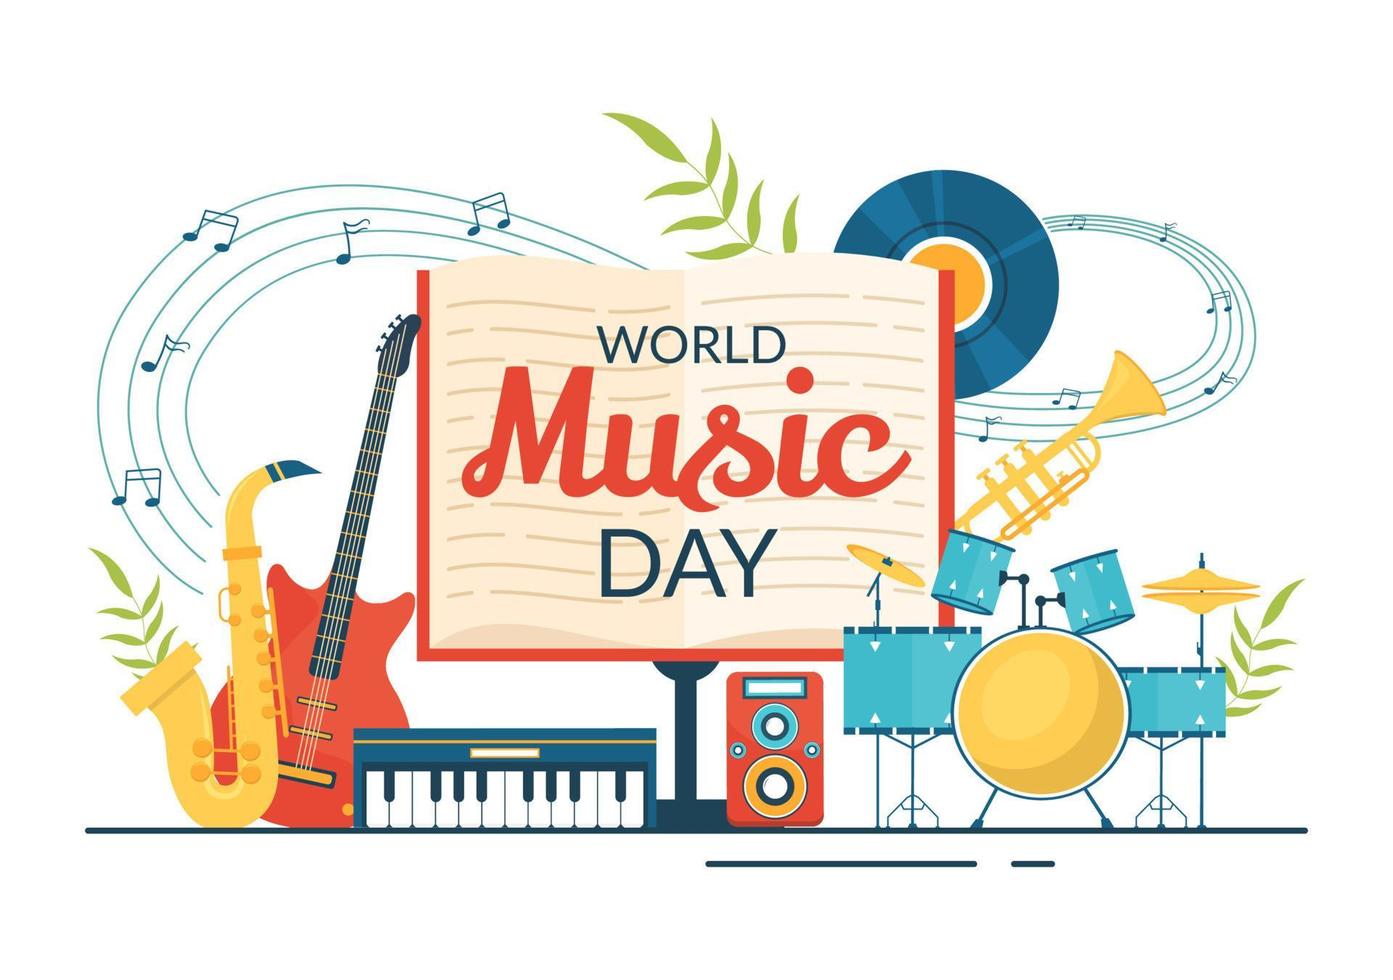 World Music Day Illustration with Various Musical Instruments and Notes in Flat Cartoon Hand Drawn for Publication Poster or Landing Page Templates vector